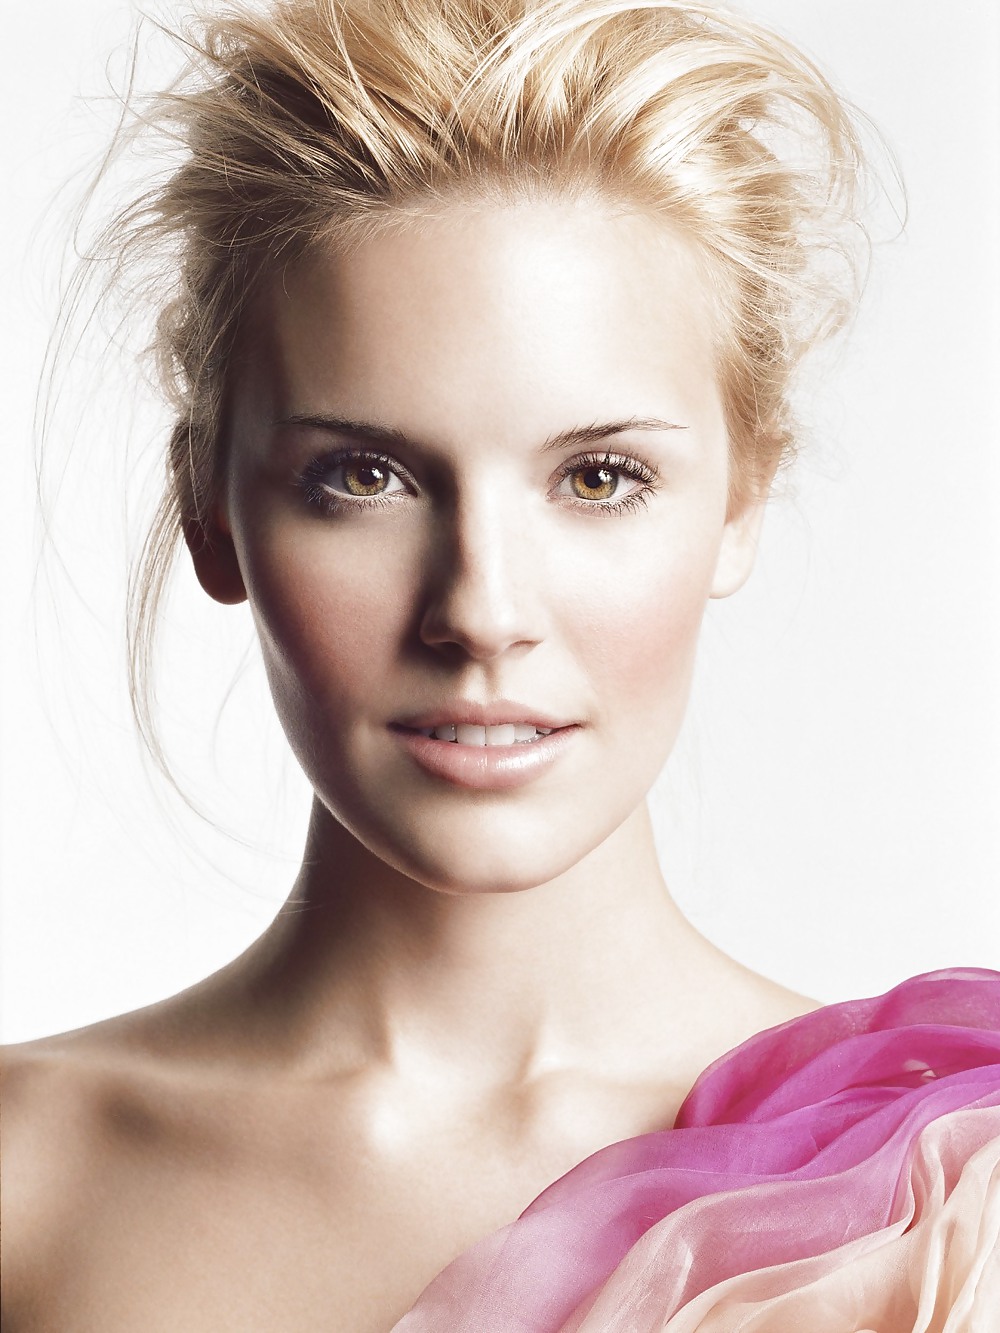 Maggie grace By twistedworlds #3303461